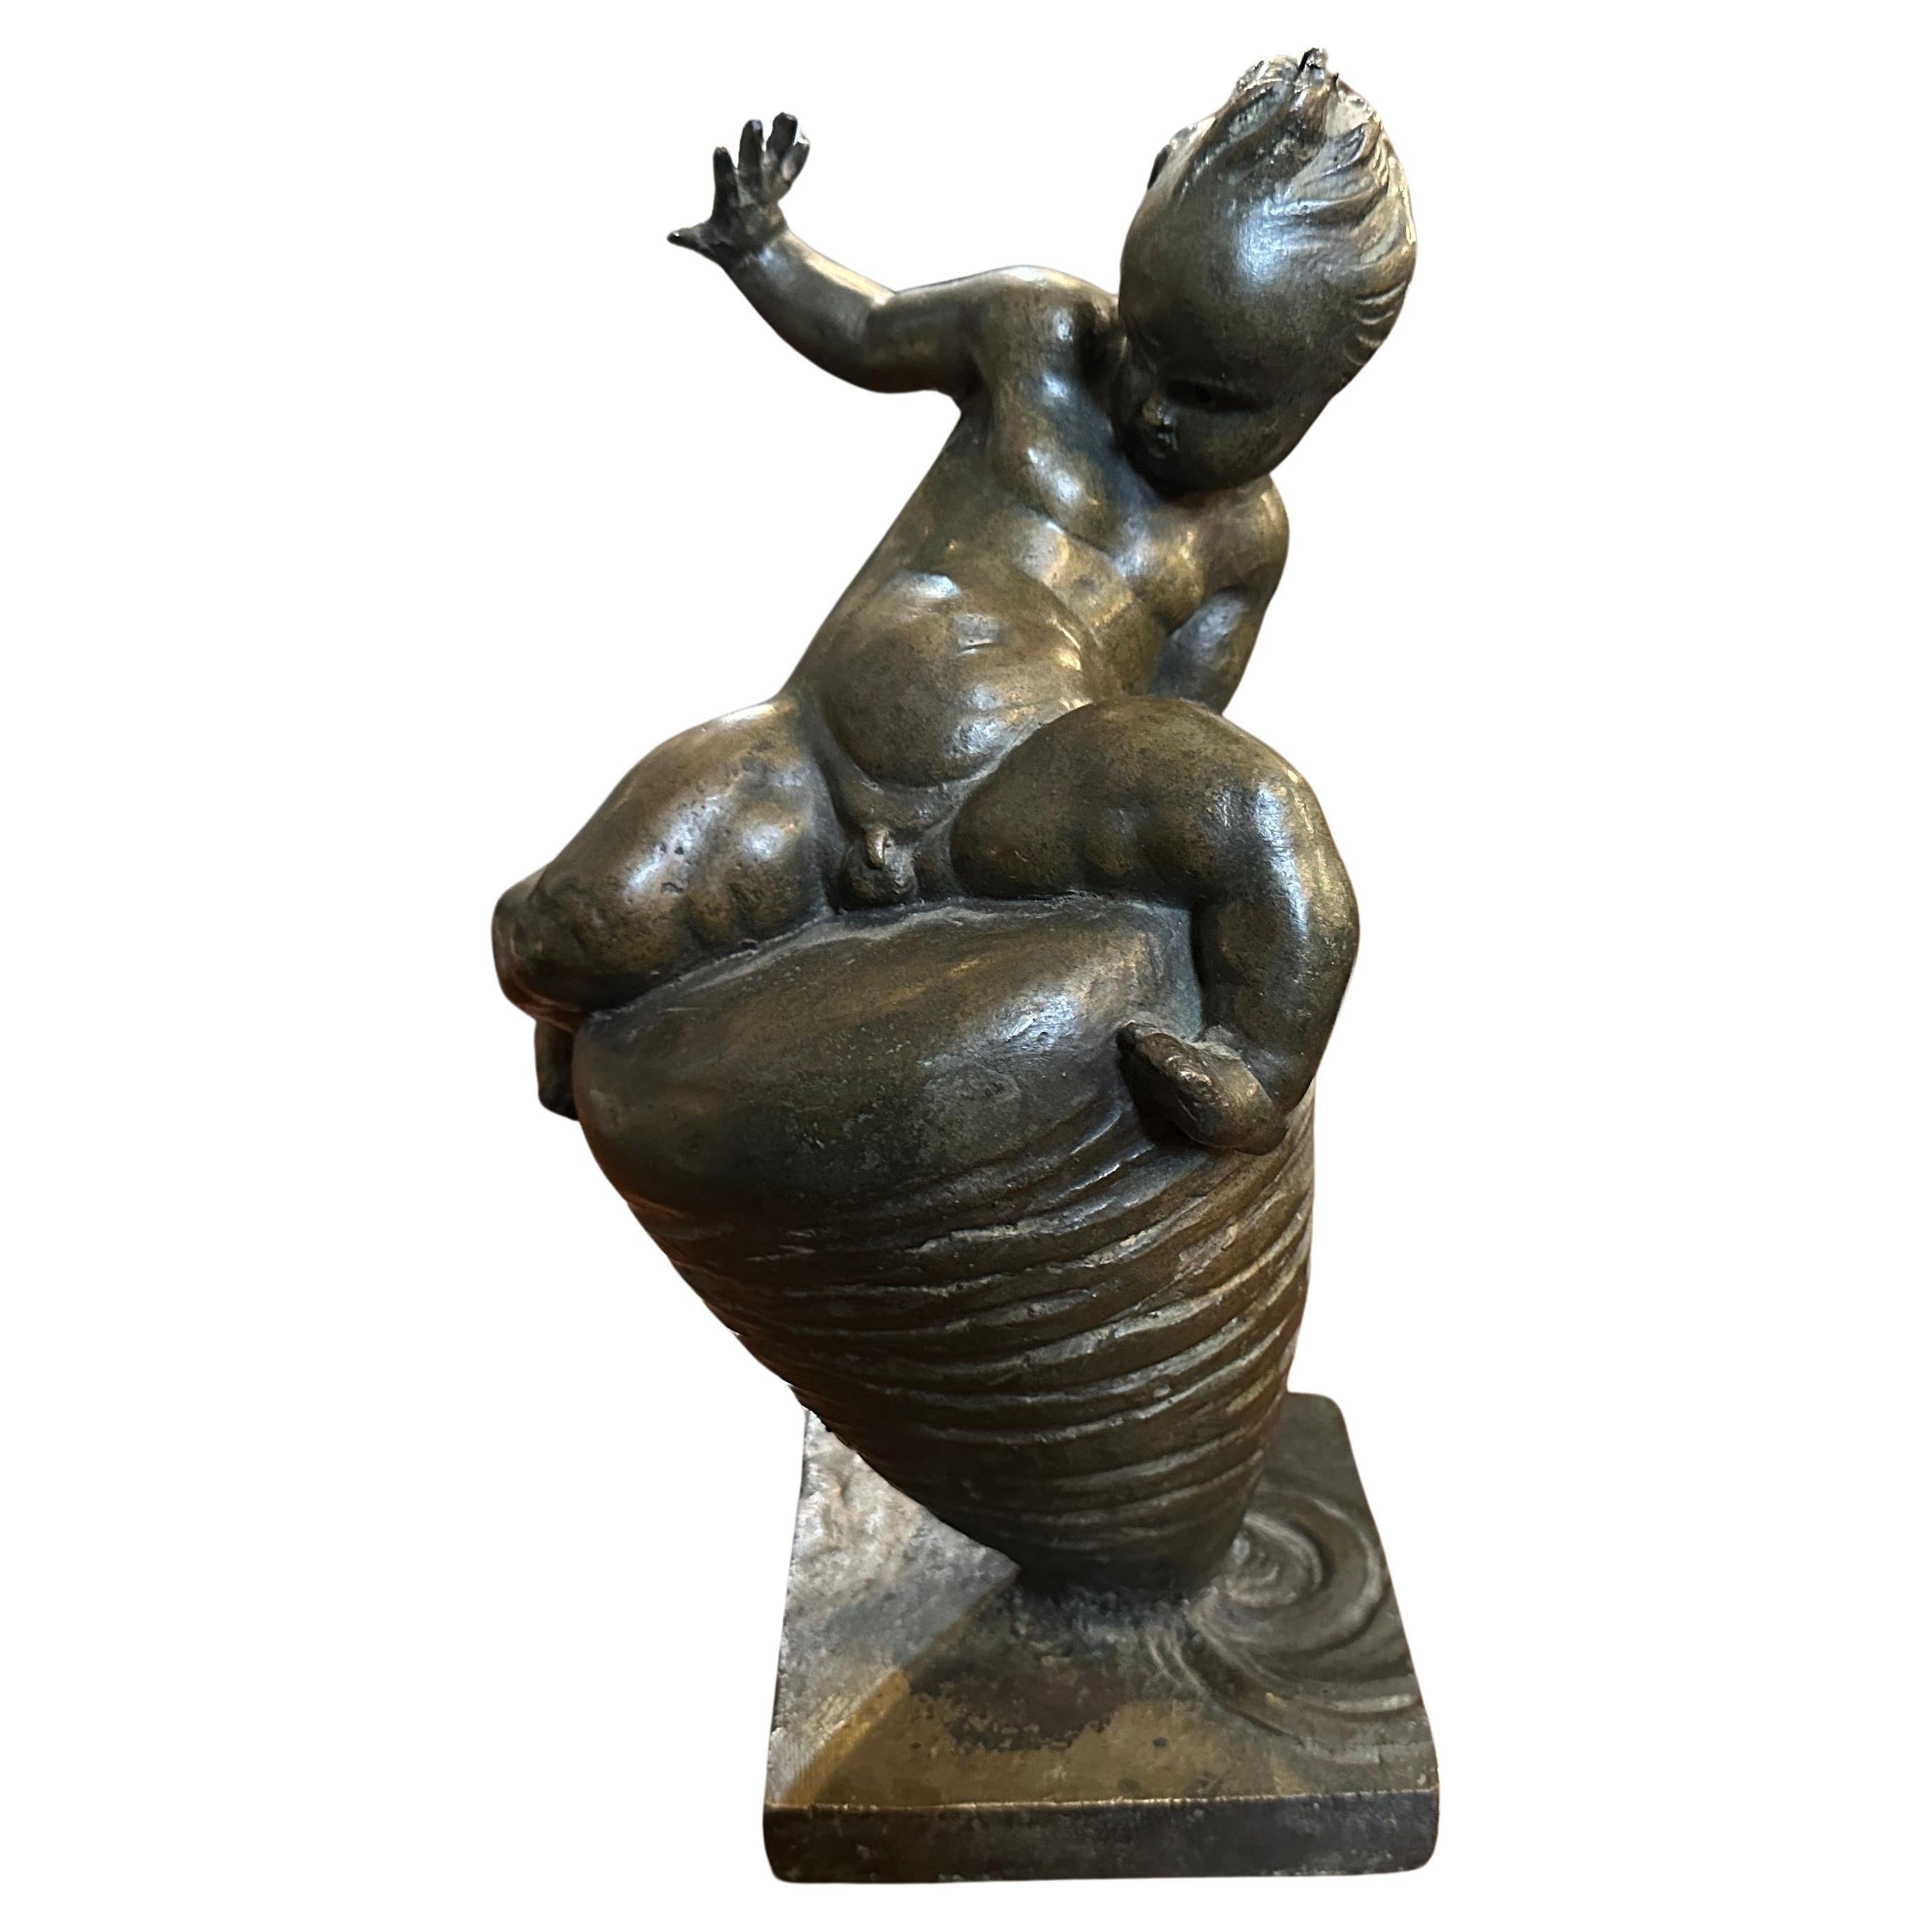 1922 Art Deco Bronze Italian Sculpture Child on a Spinning Top by T. Montini For Sale